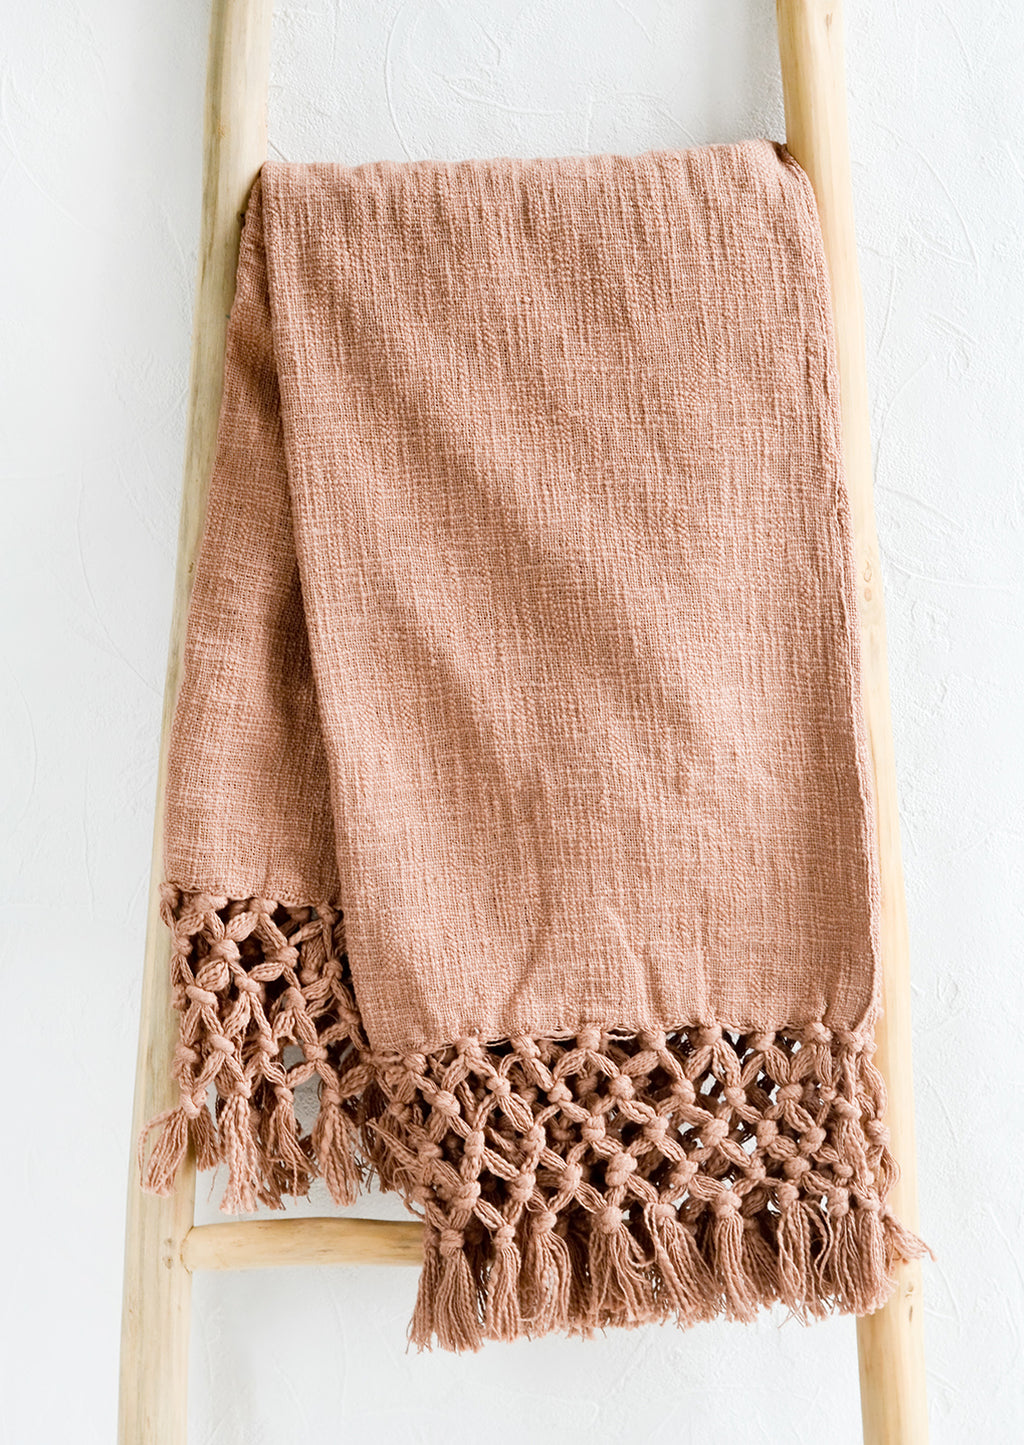 Clay: A muted red-brown cotton throw blanket with knotted open weave trim, displayed on a ladder.